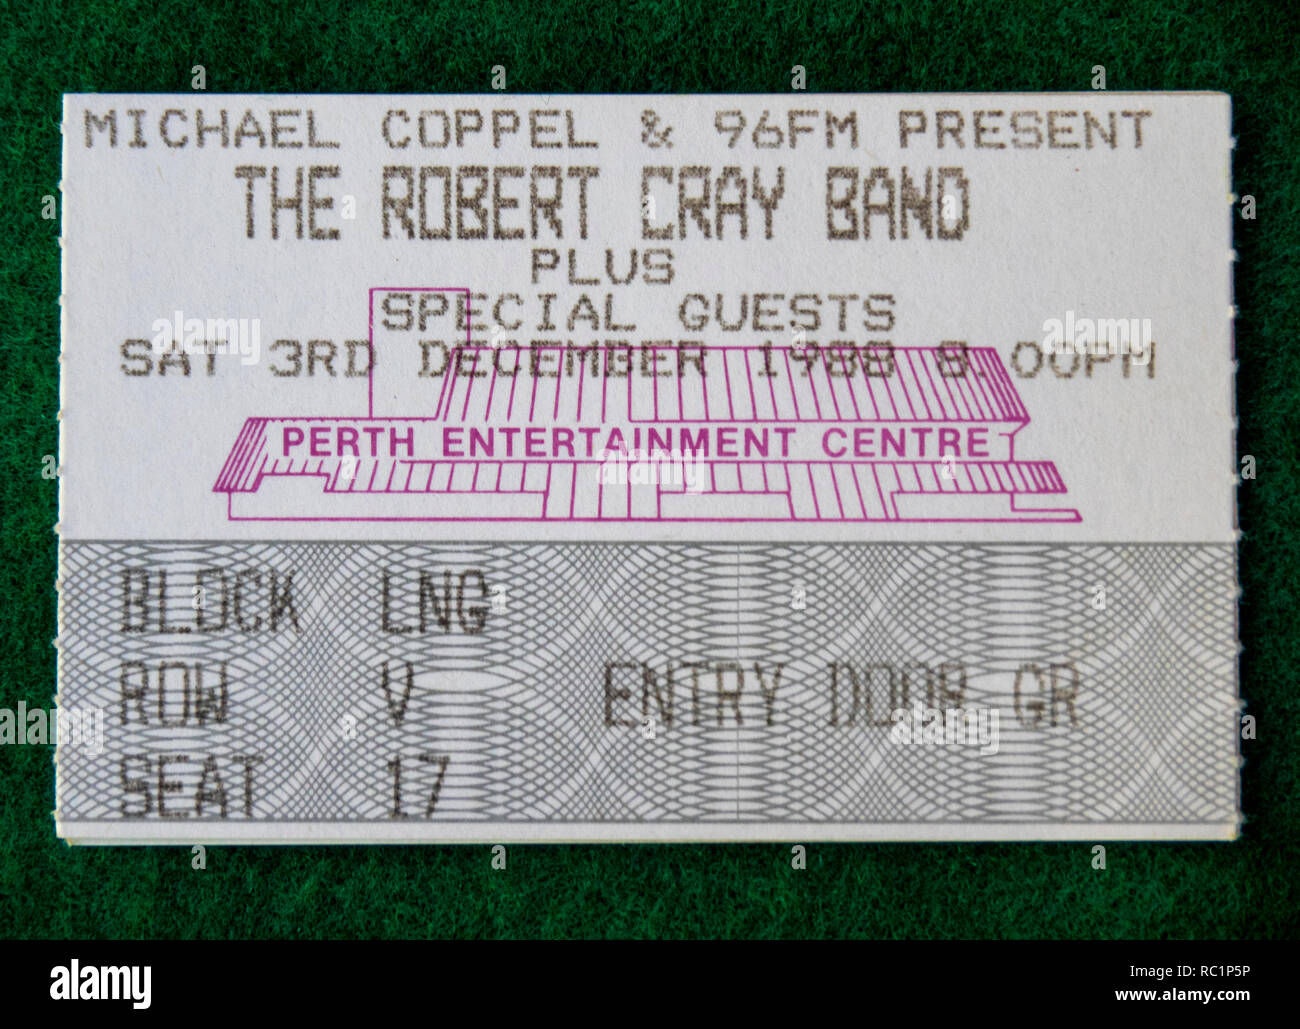 Ticket for Robert Cray Band concert at Perth Entertainment Centre in 1988 WA Australia. Stock Photo